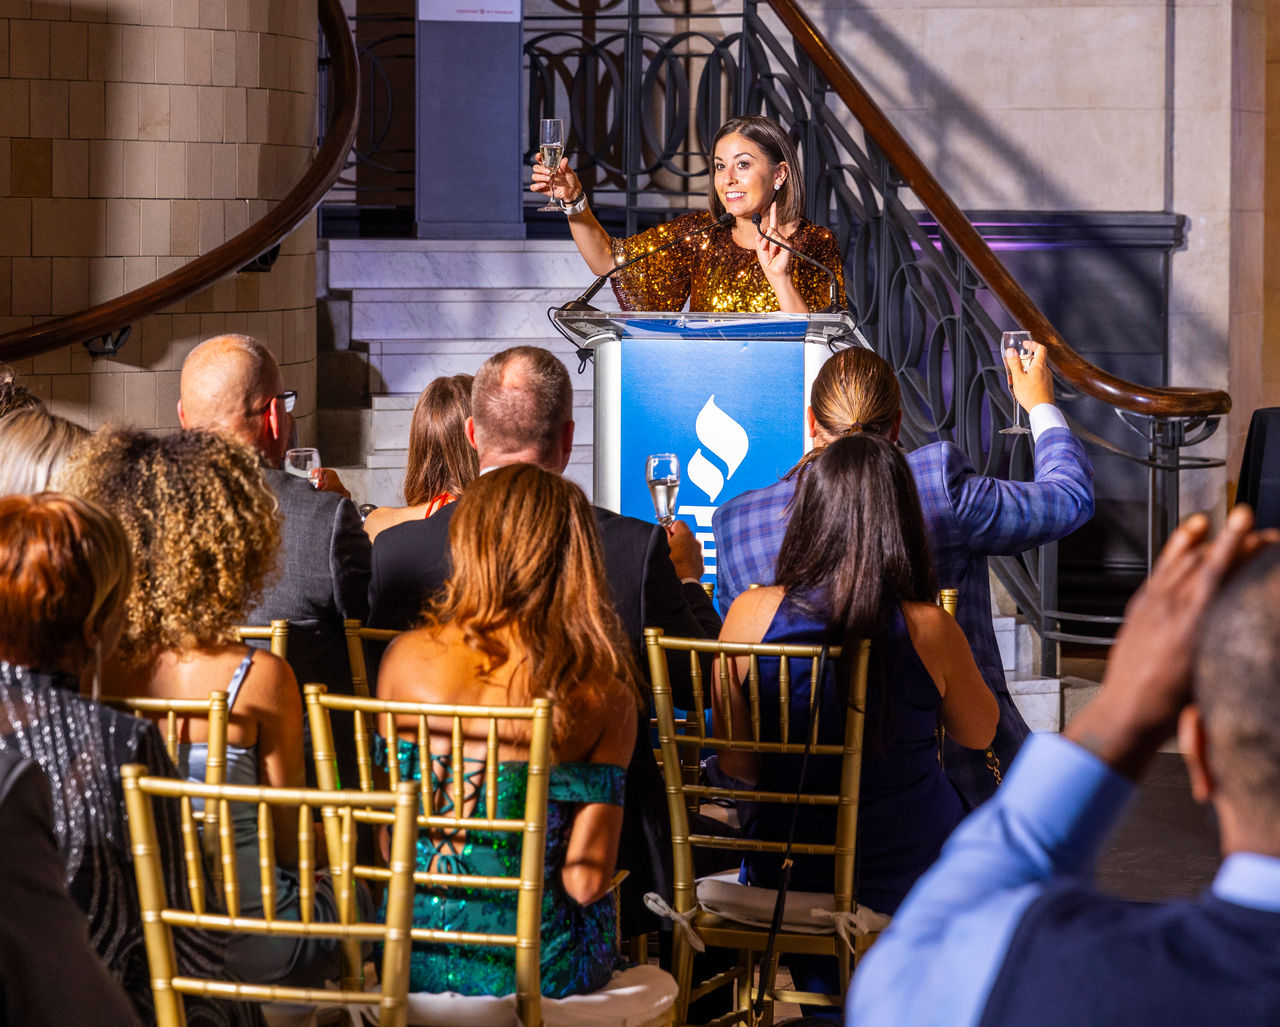 Event emcee Cassy Arsenault, Local 12, raises a toast to the 2023 BBB Torch and Spark Awards winners with event guests.